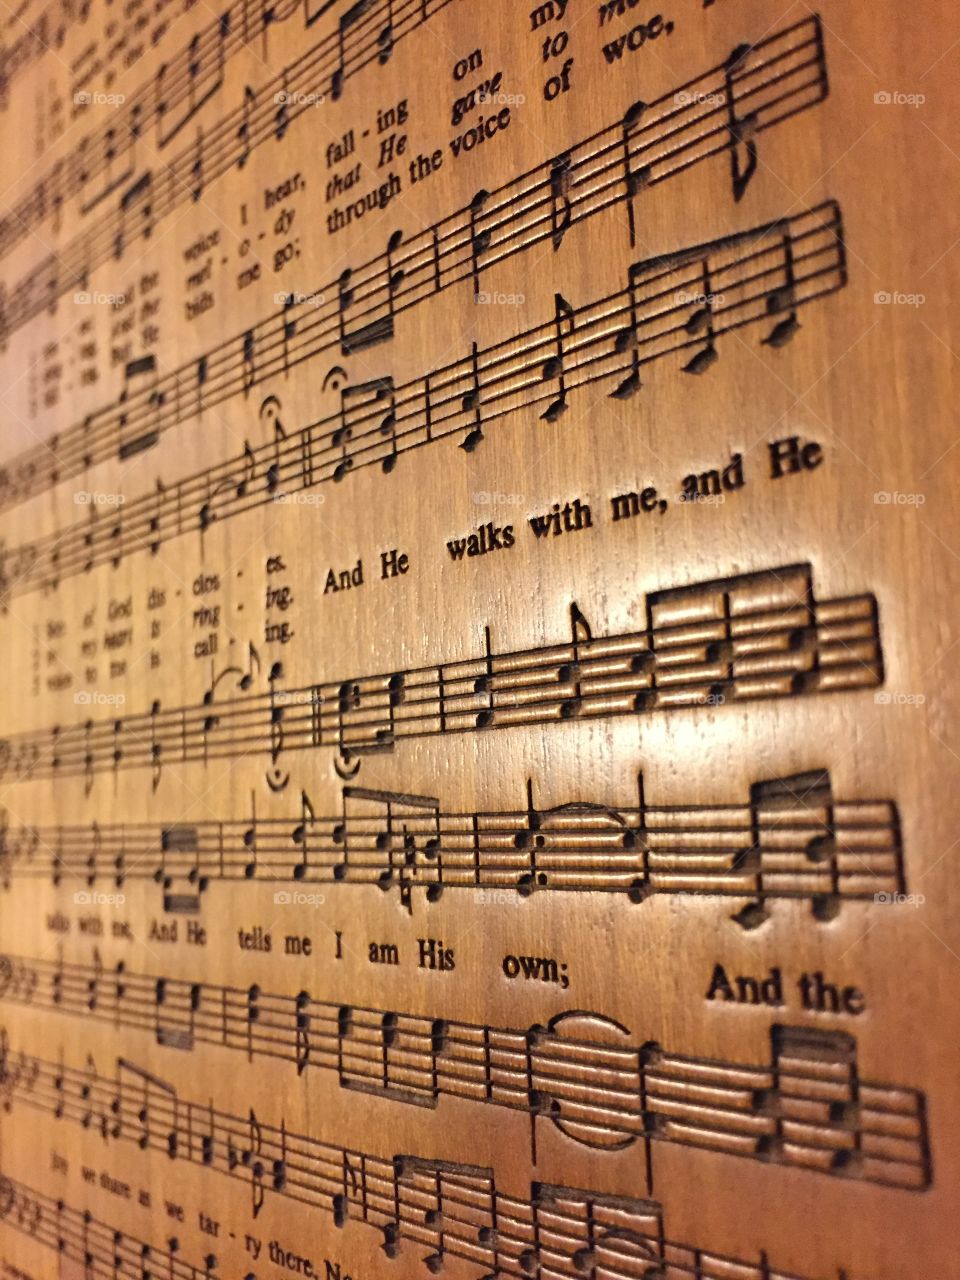 Engraved music